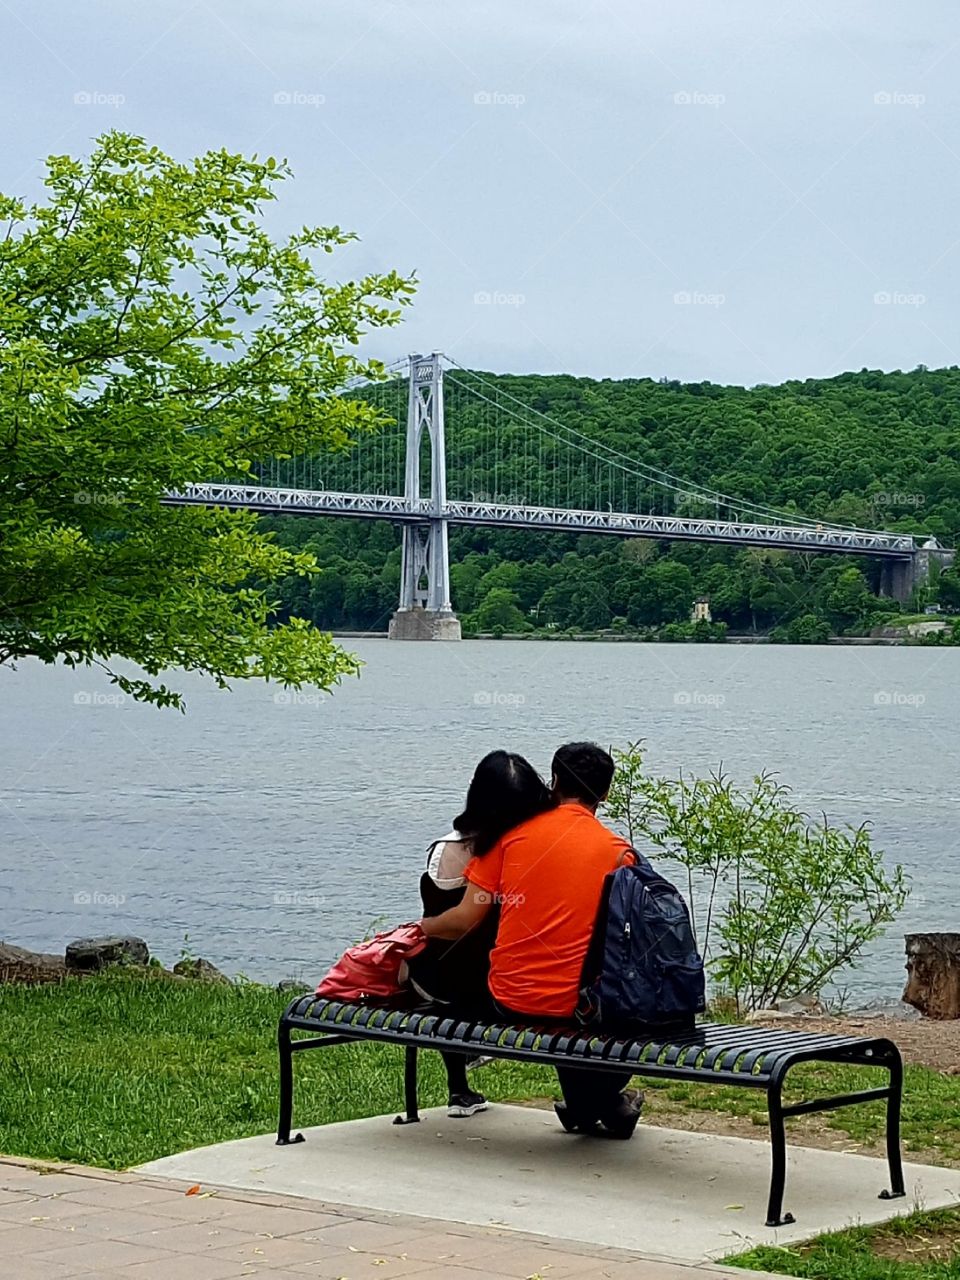 A romantic couple rests and watches the peaceful river flow.